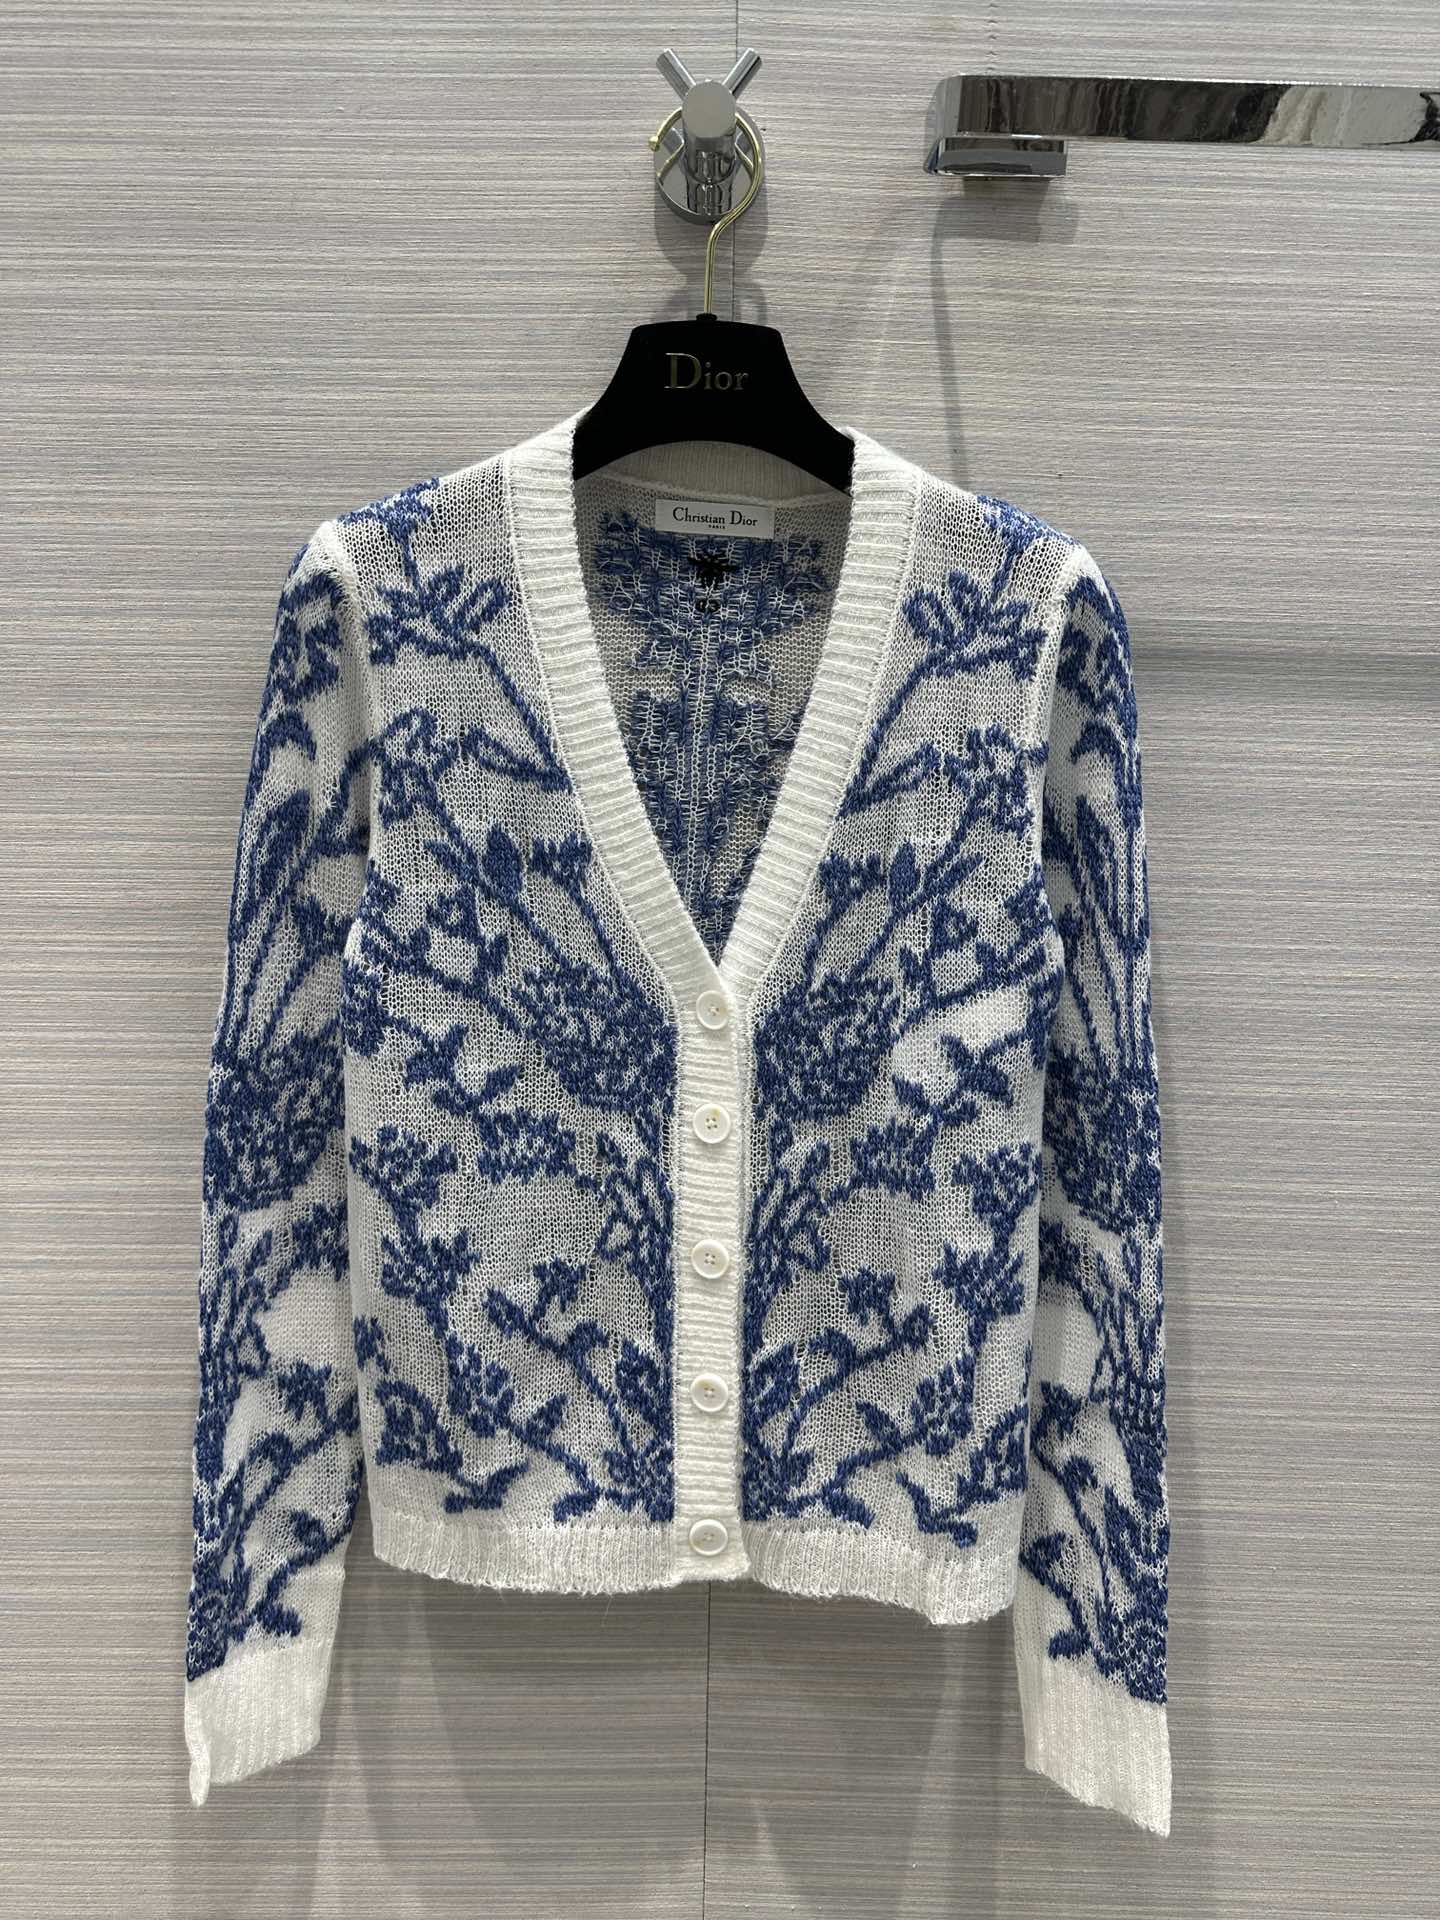 Dior Cheap
 Clothing Cardigans Knit Sweater best website for replica
 White Embroidery Cashmere Knitting Weave Fall Collection